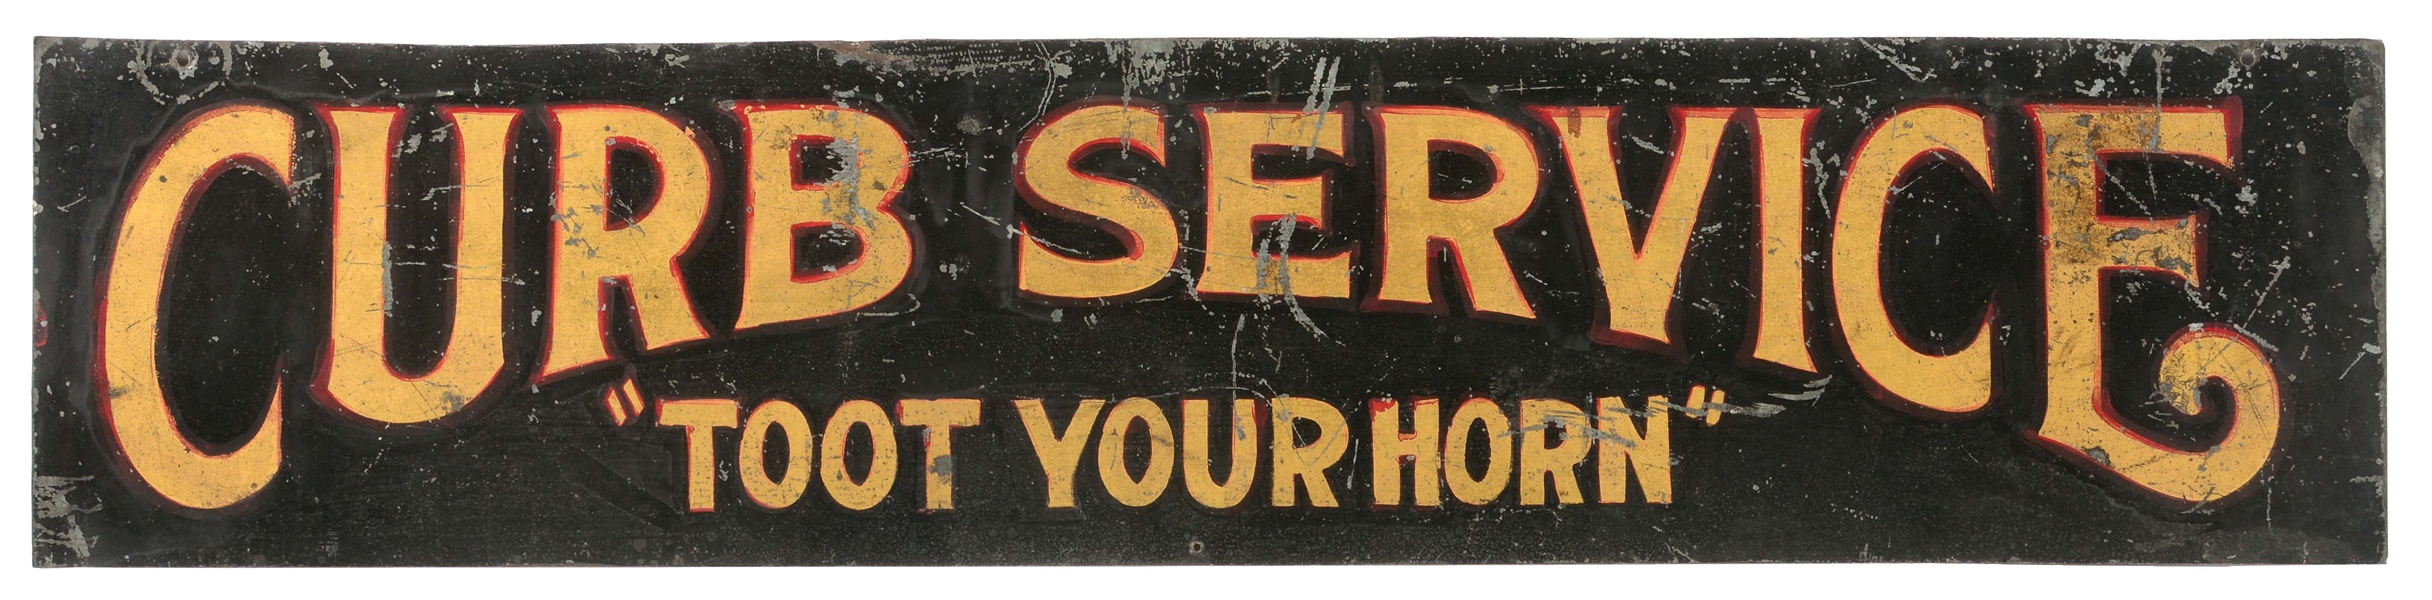 CURB SERVICE "TOOT YOUR HORN" HAND PAINTED TIN SIGN. 